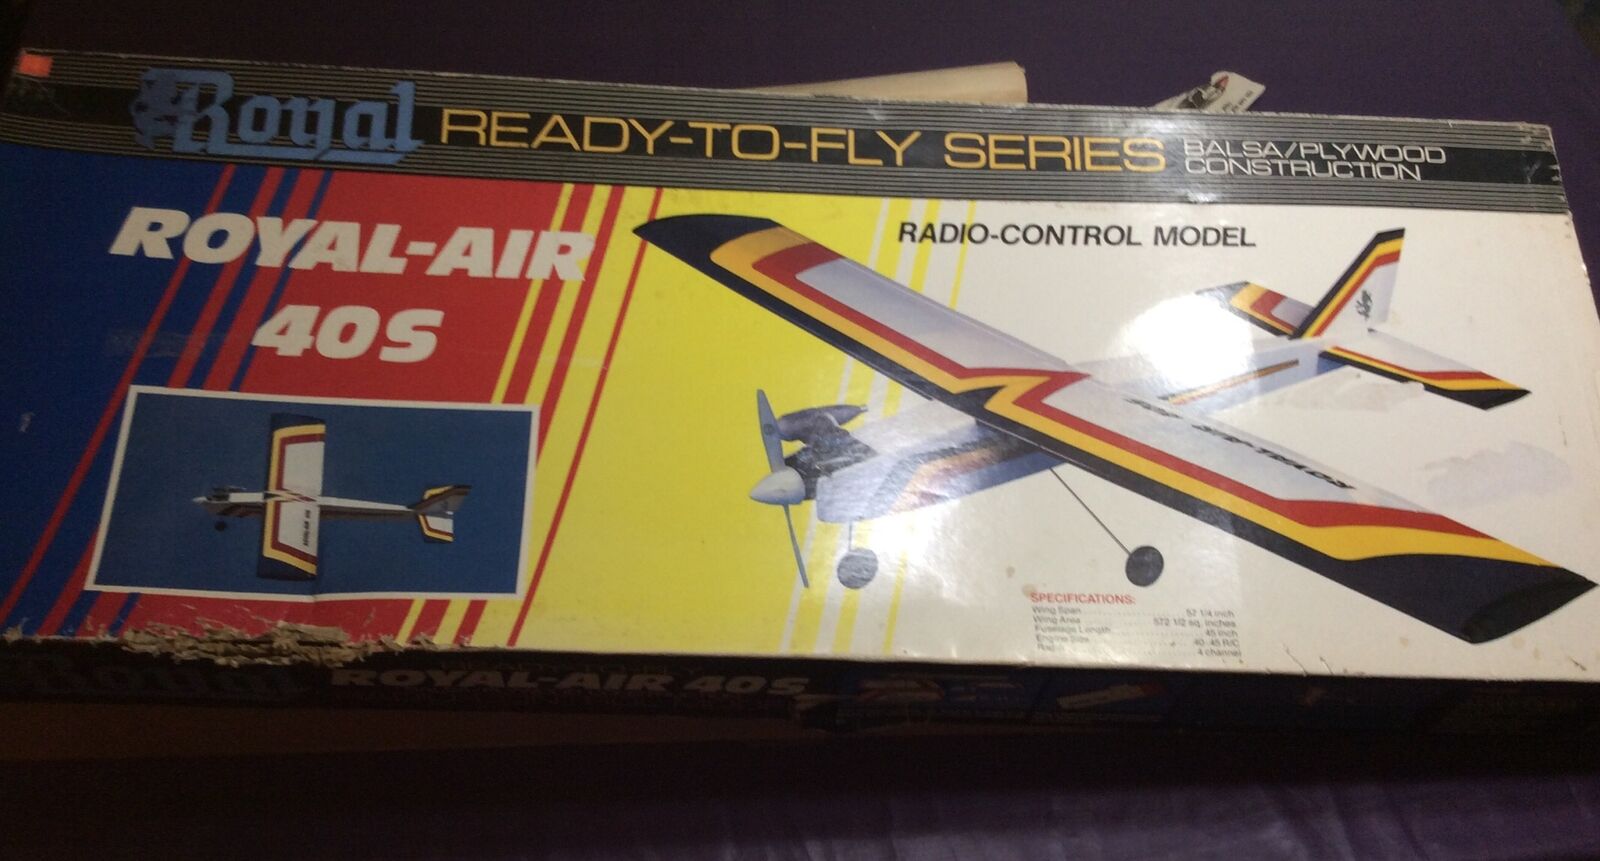 Royal Air 405 Balsa Wood R/C Flying Model Kit Large Scale Plane Lots of Parts!